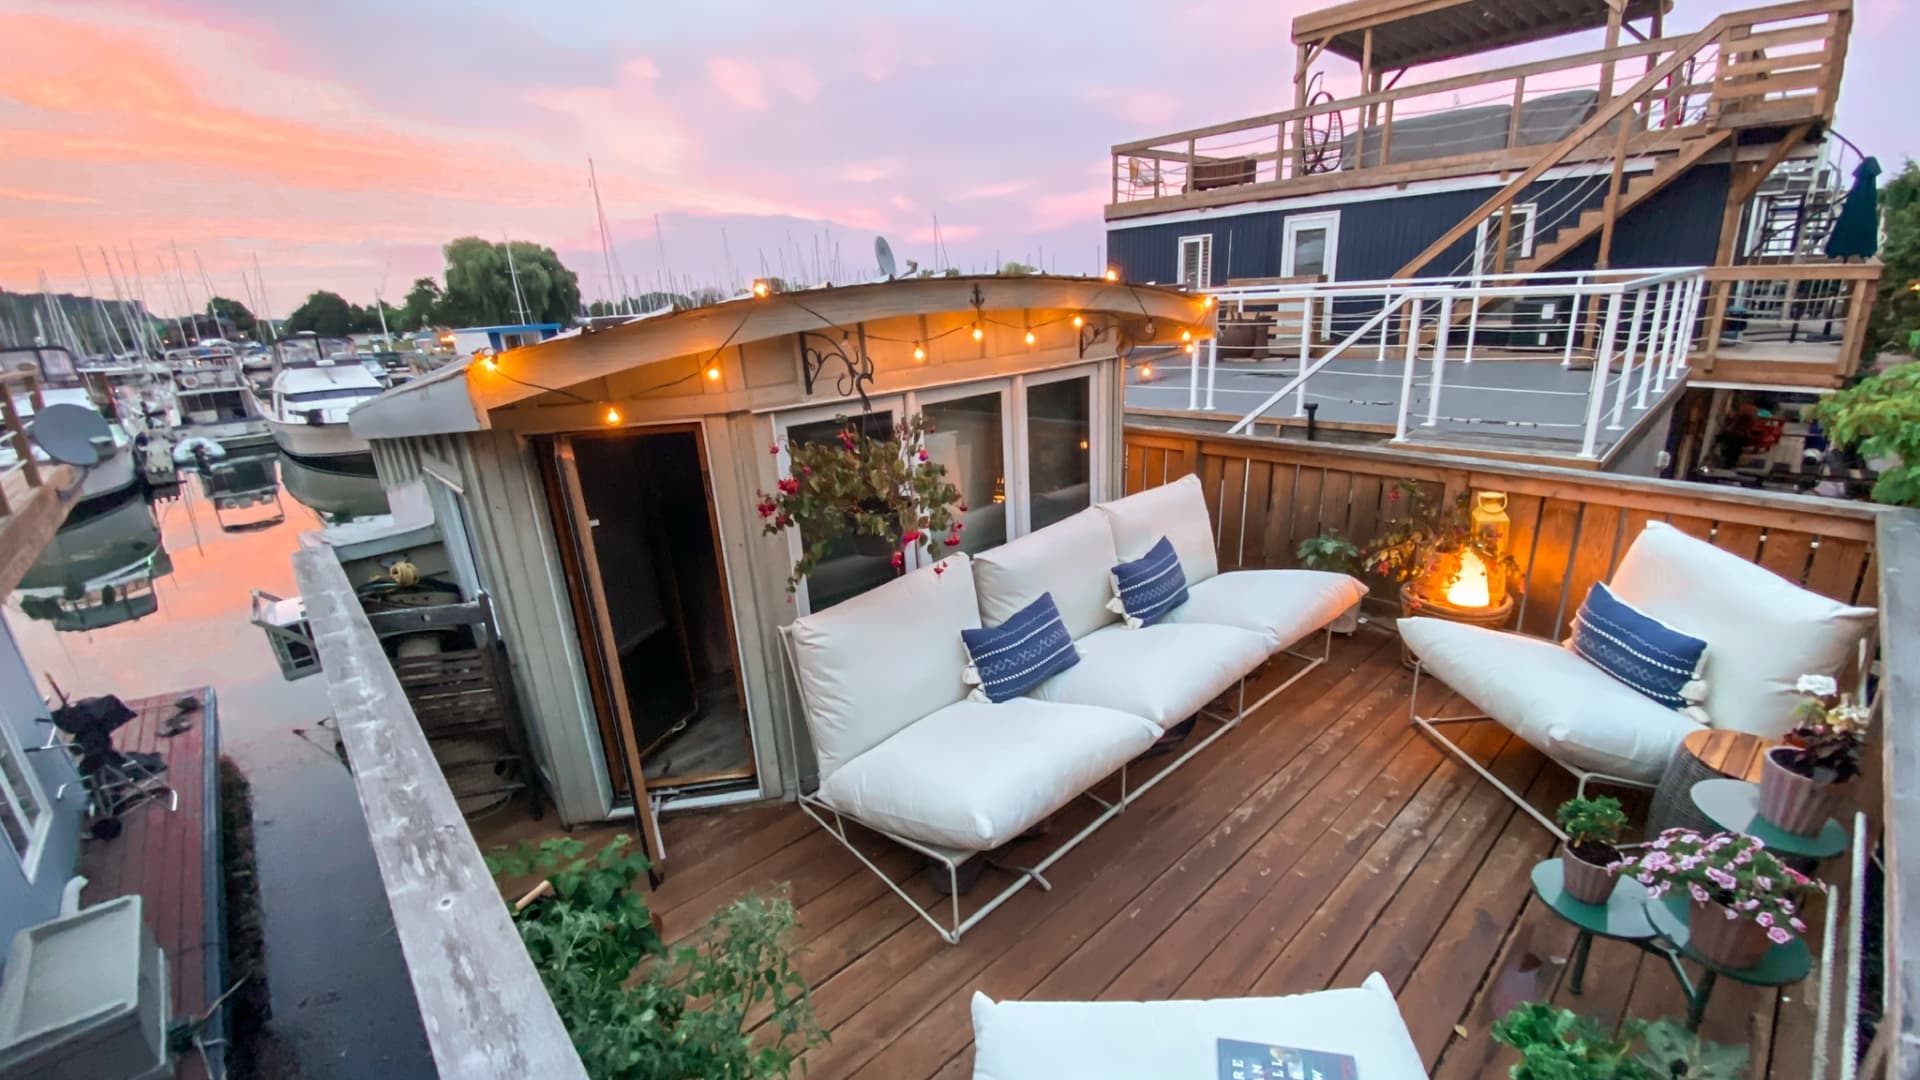 I pay $1,450 a month to live on a houseboat in Toronto—'the best decision I ever made': Take a look inside